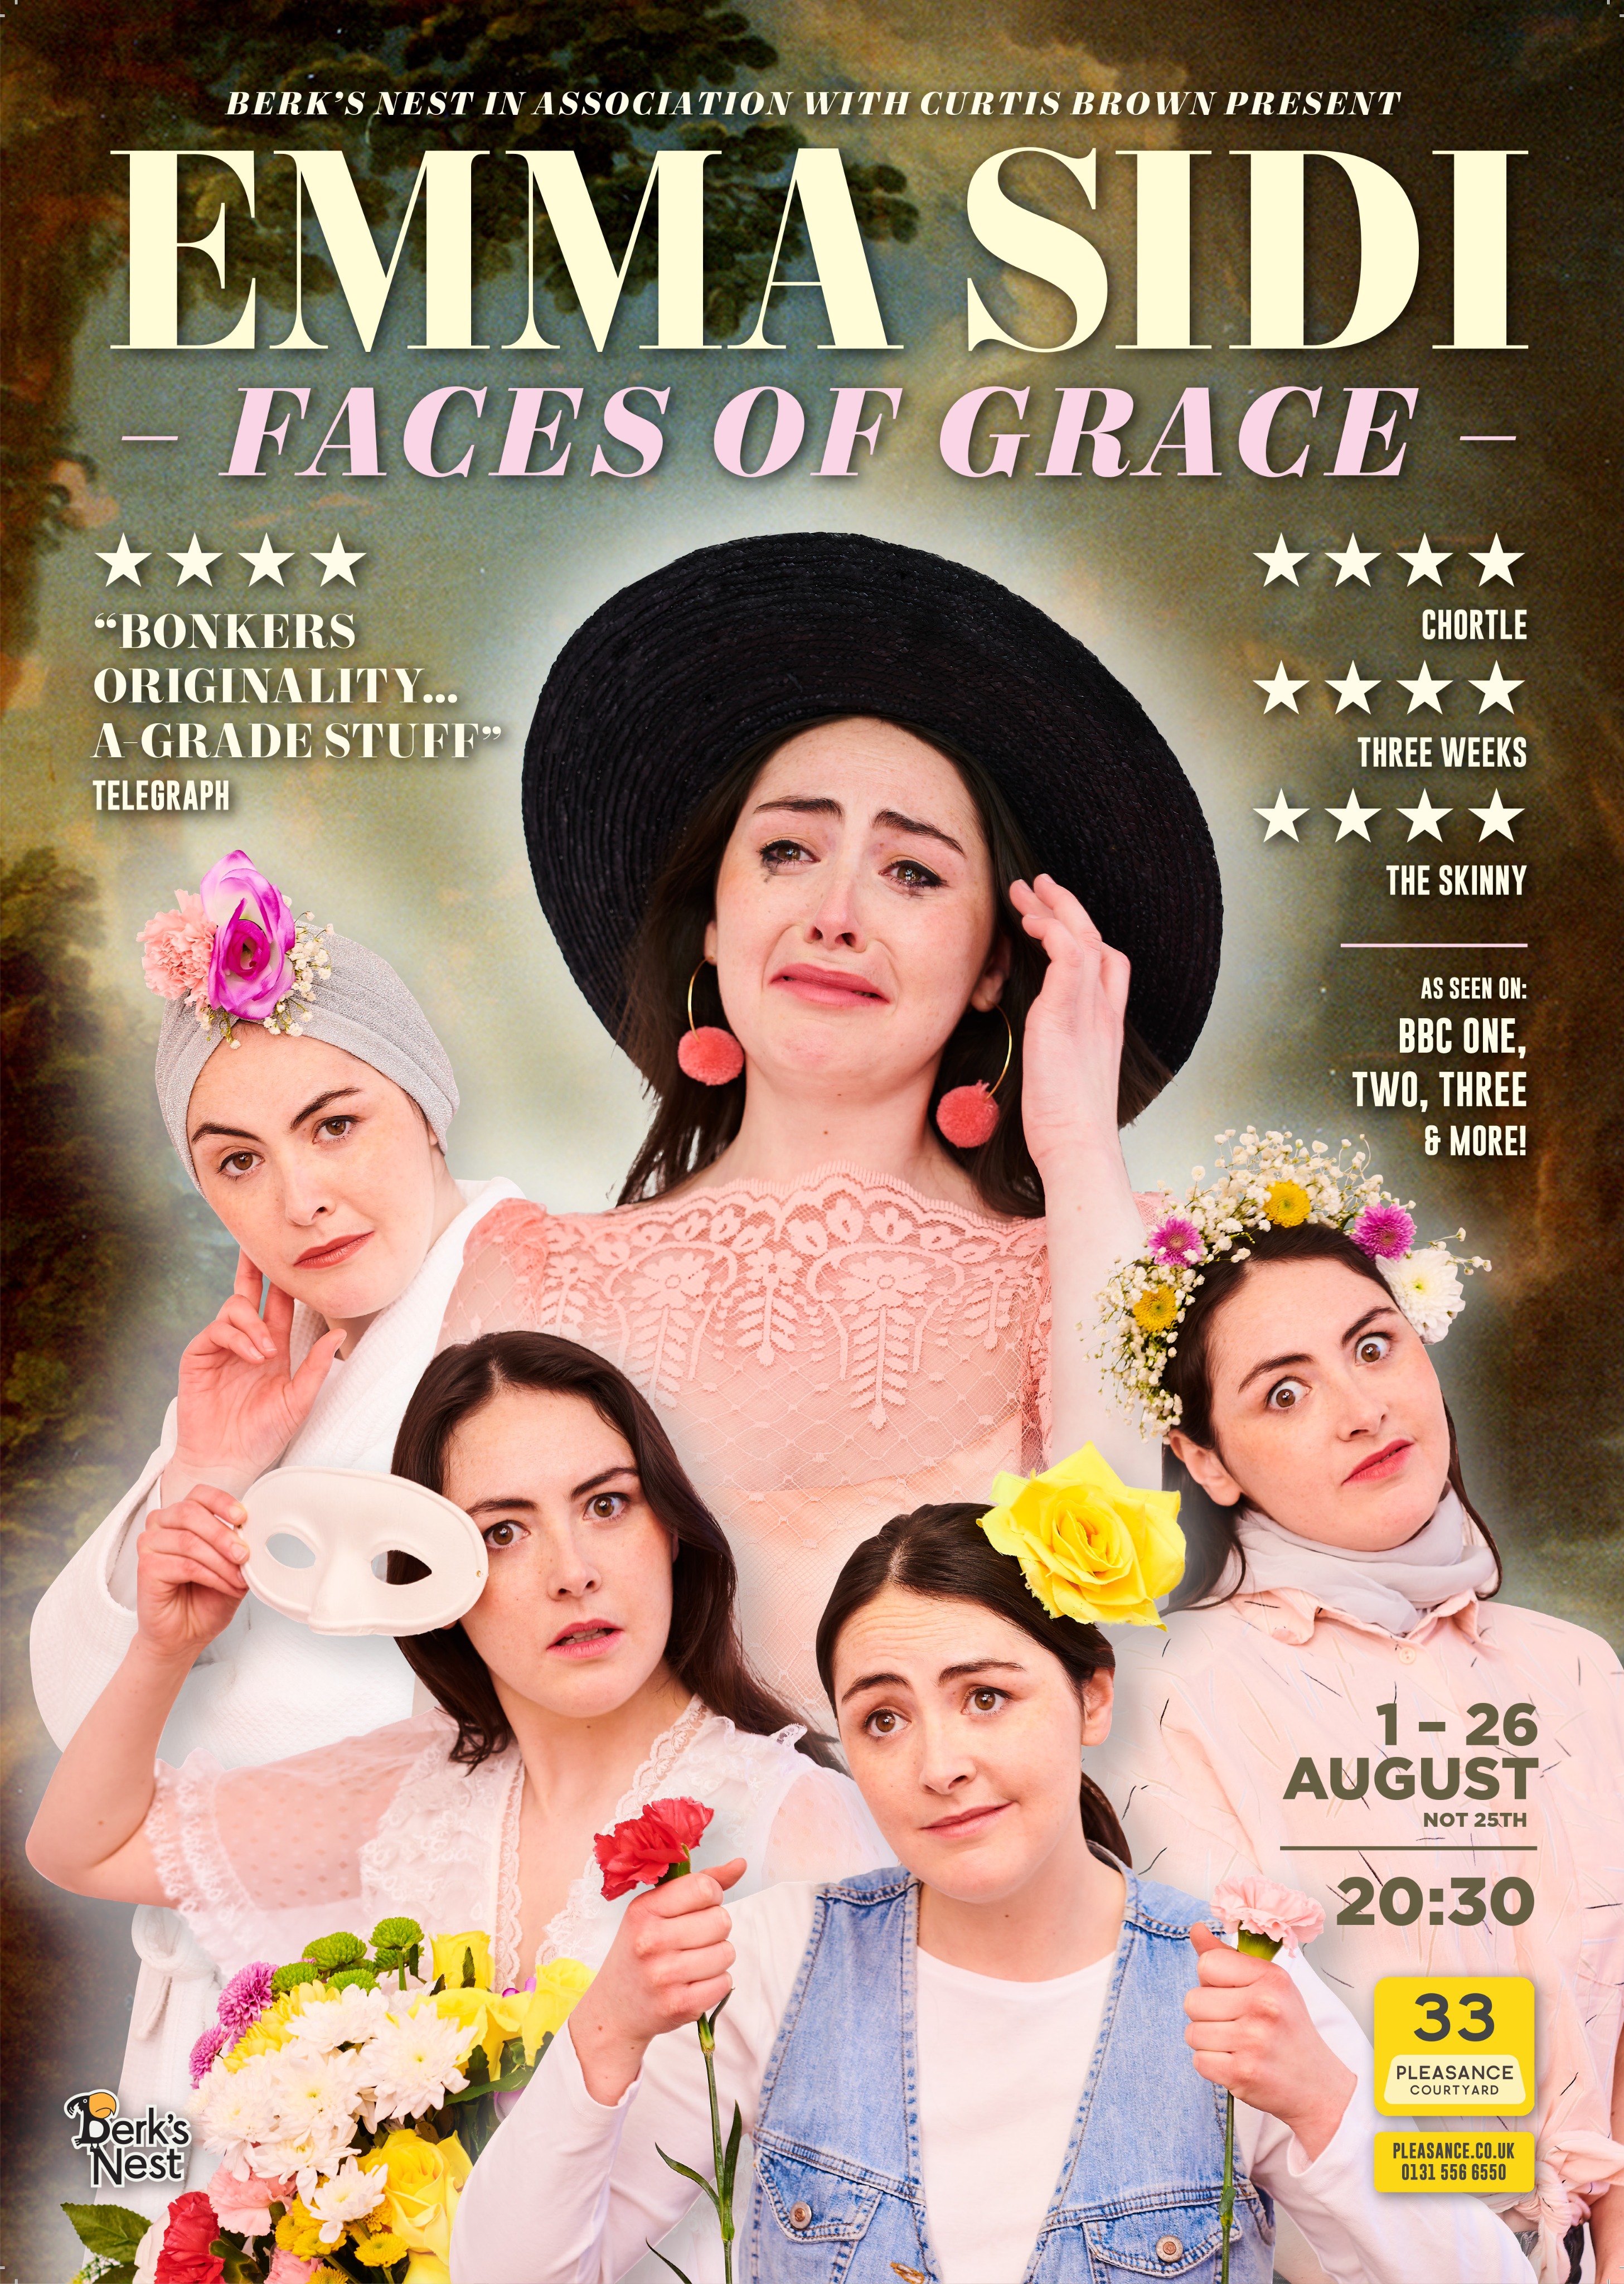 The poster for Emma Sidi: Faces of Grace